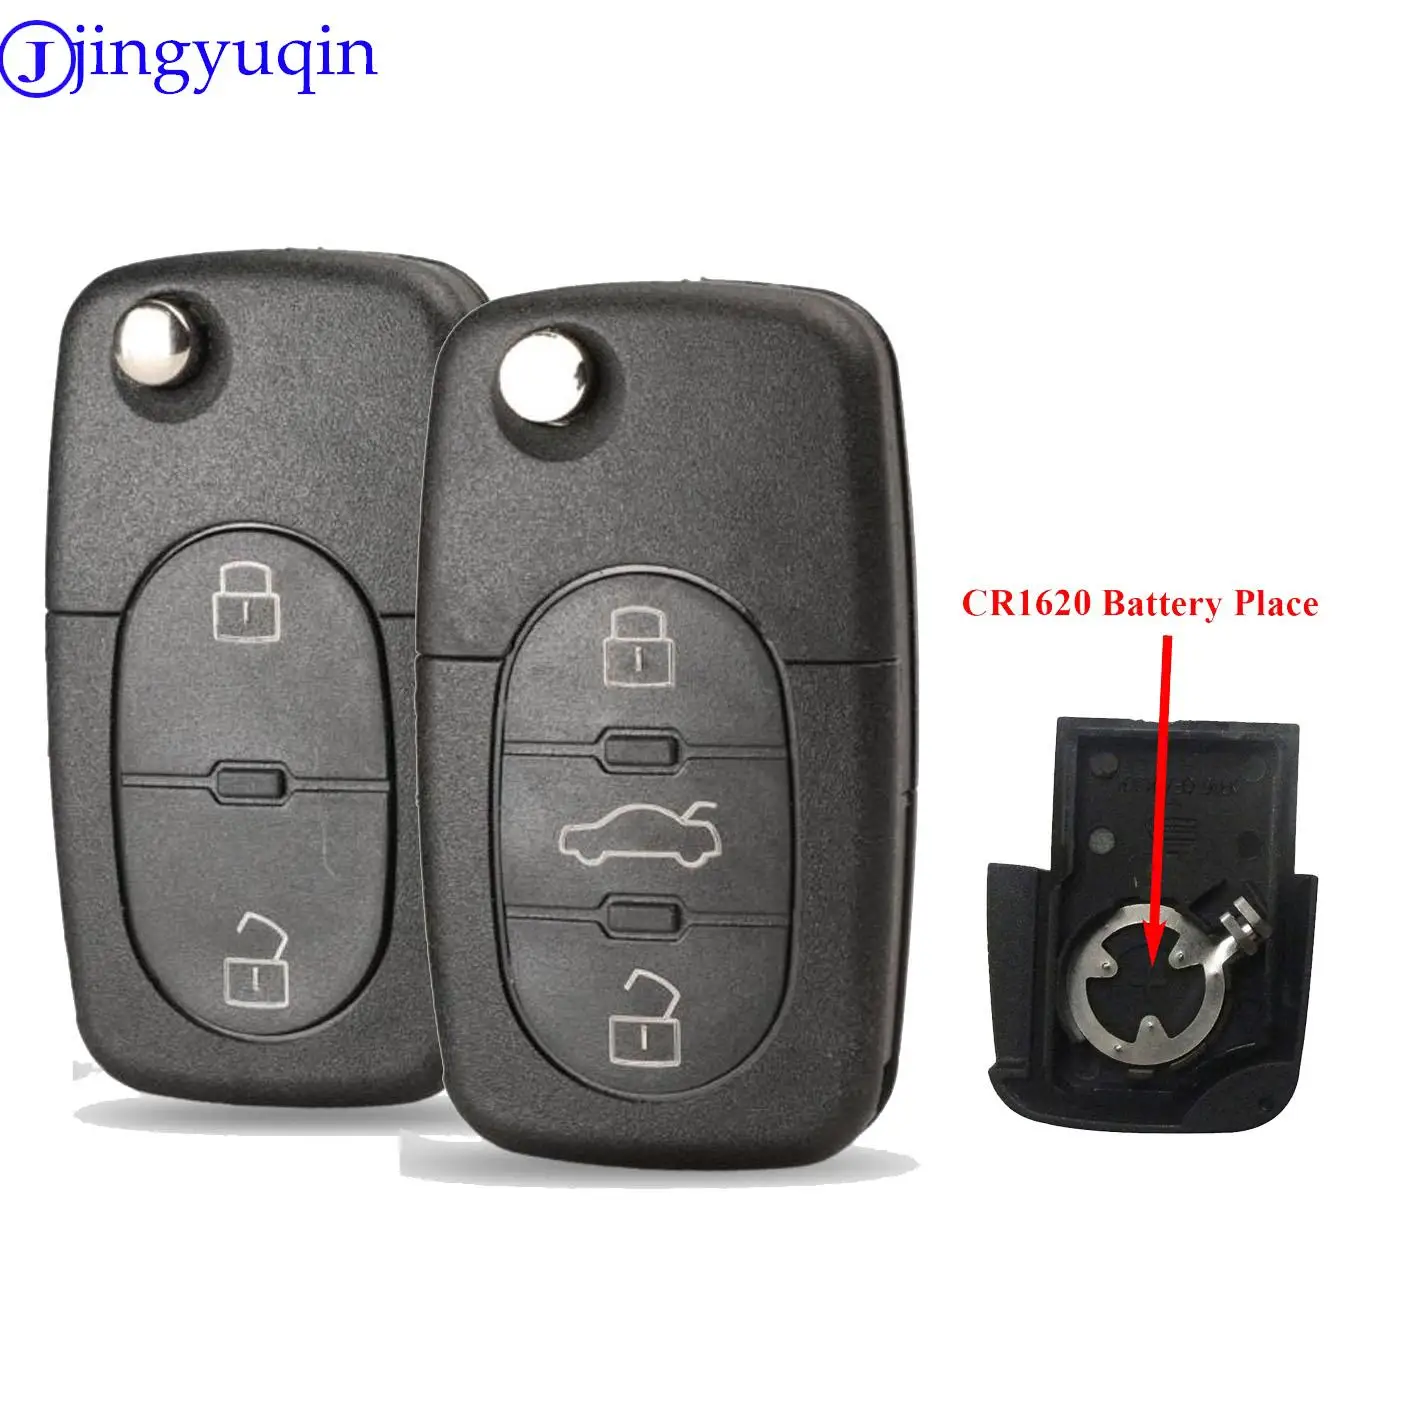 

jingyuqin 2/3 Buttons Flip Remote Car Key Shell For Audi A2 A3 A4 A6 A8 TT Fob Case Cover CR1620 Battery Place